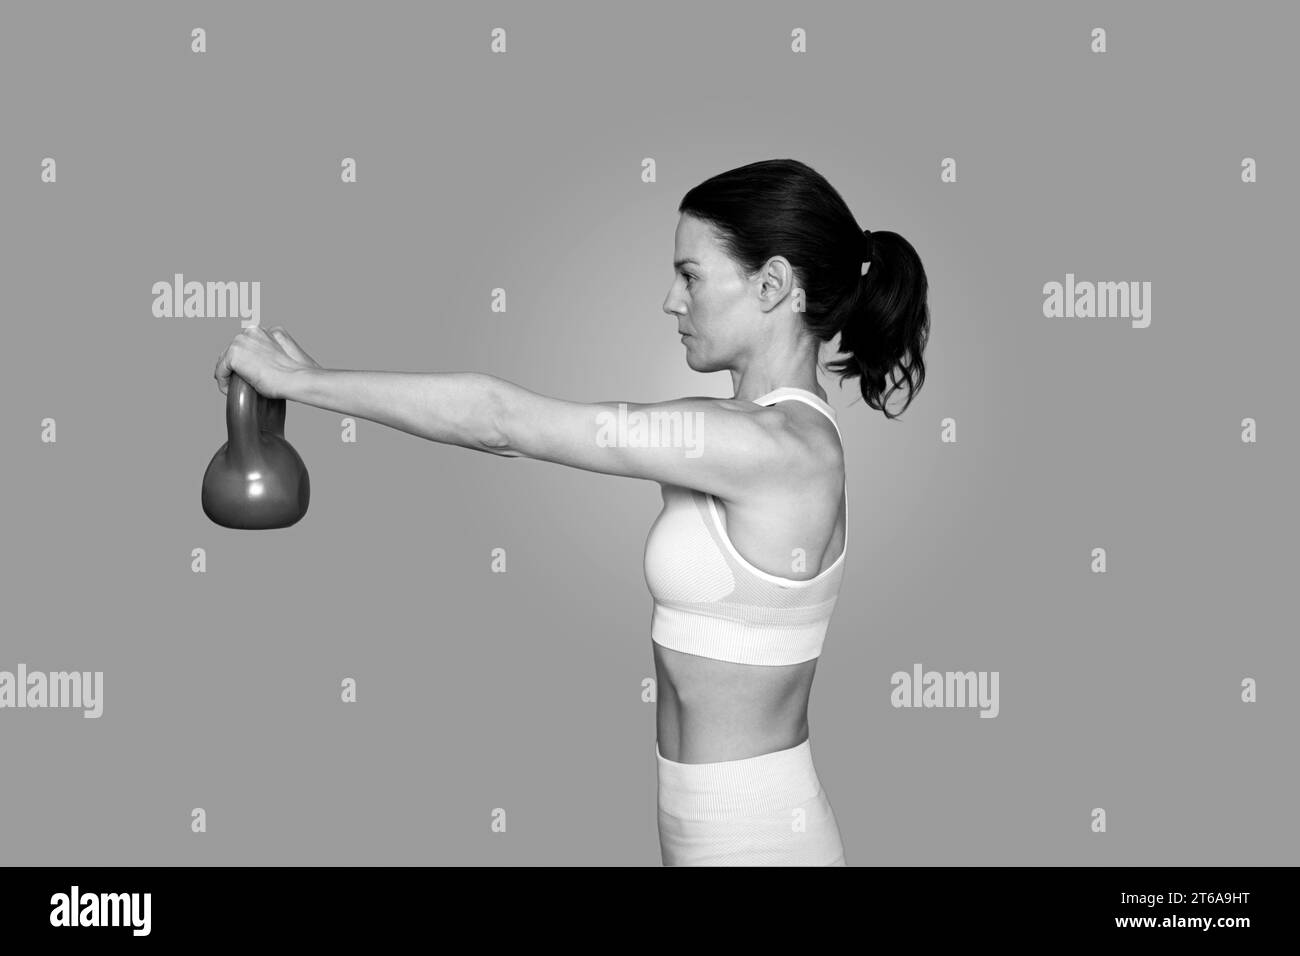 fit woman using a kettle bell weight, close up, black and white. Stock Photo